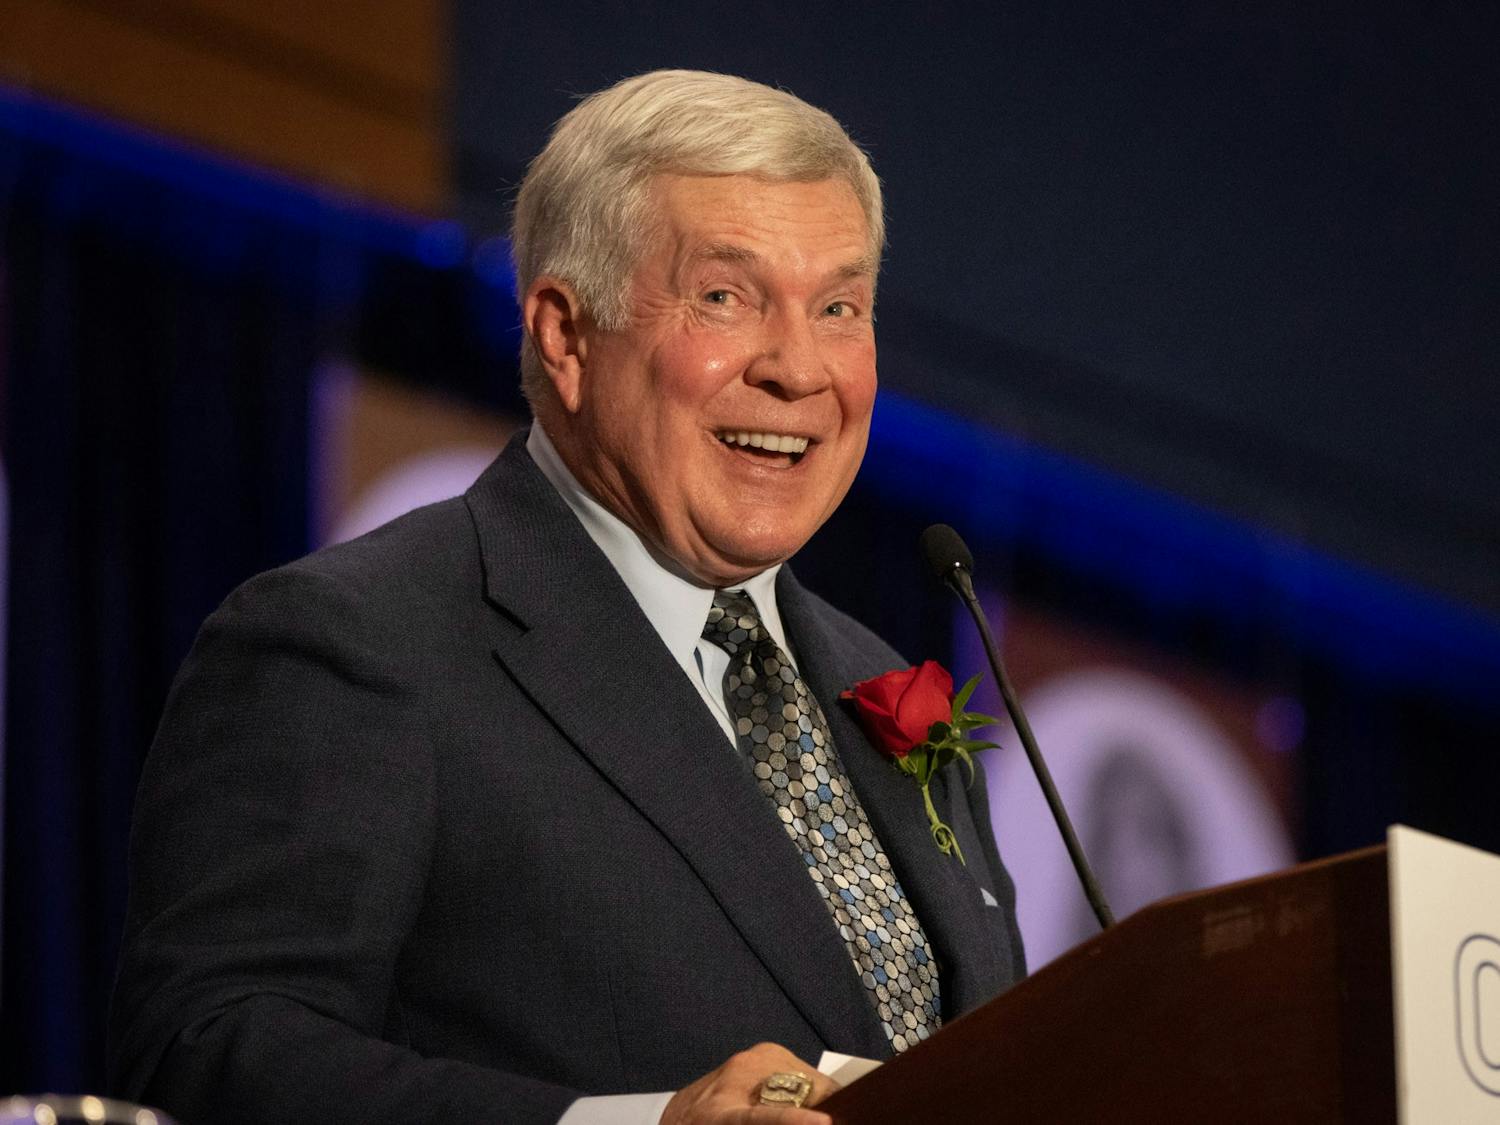 Mack Brown, head coach of UNC's football team, delivers an acceptance speech at the North Carolina Sports Hall of Fame induction ceremony Friday.